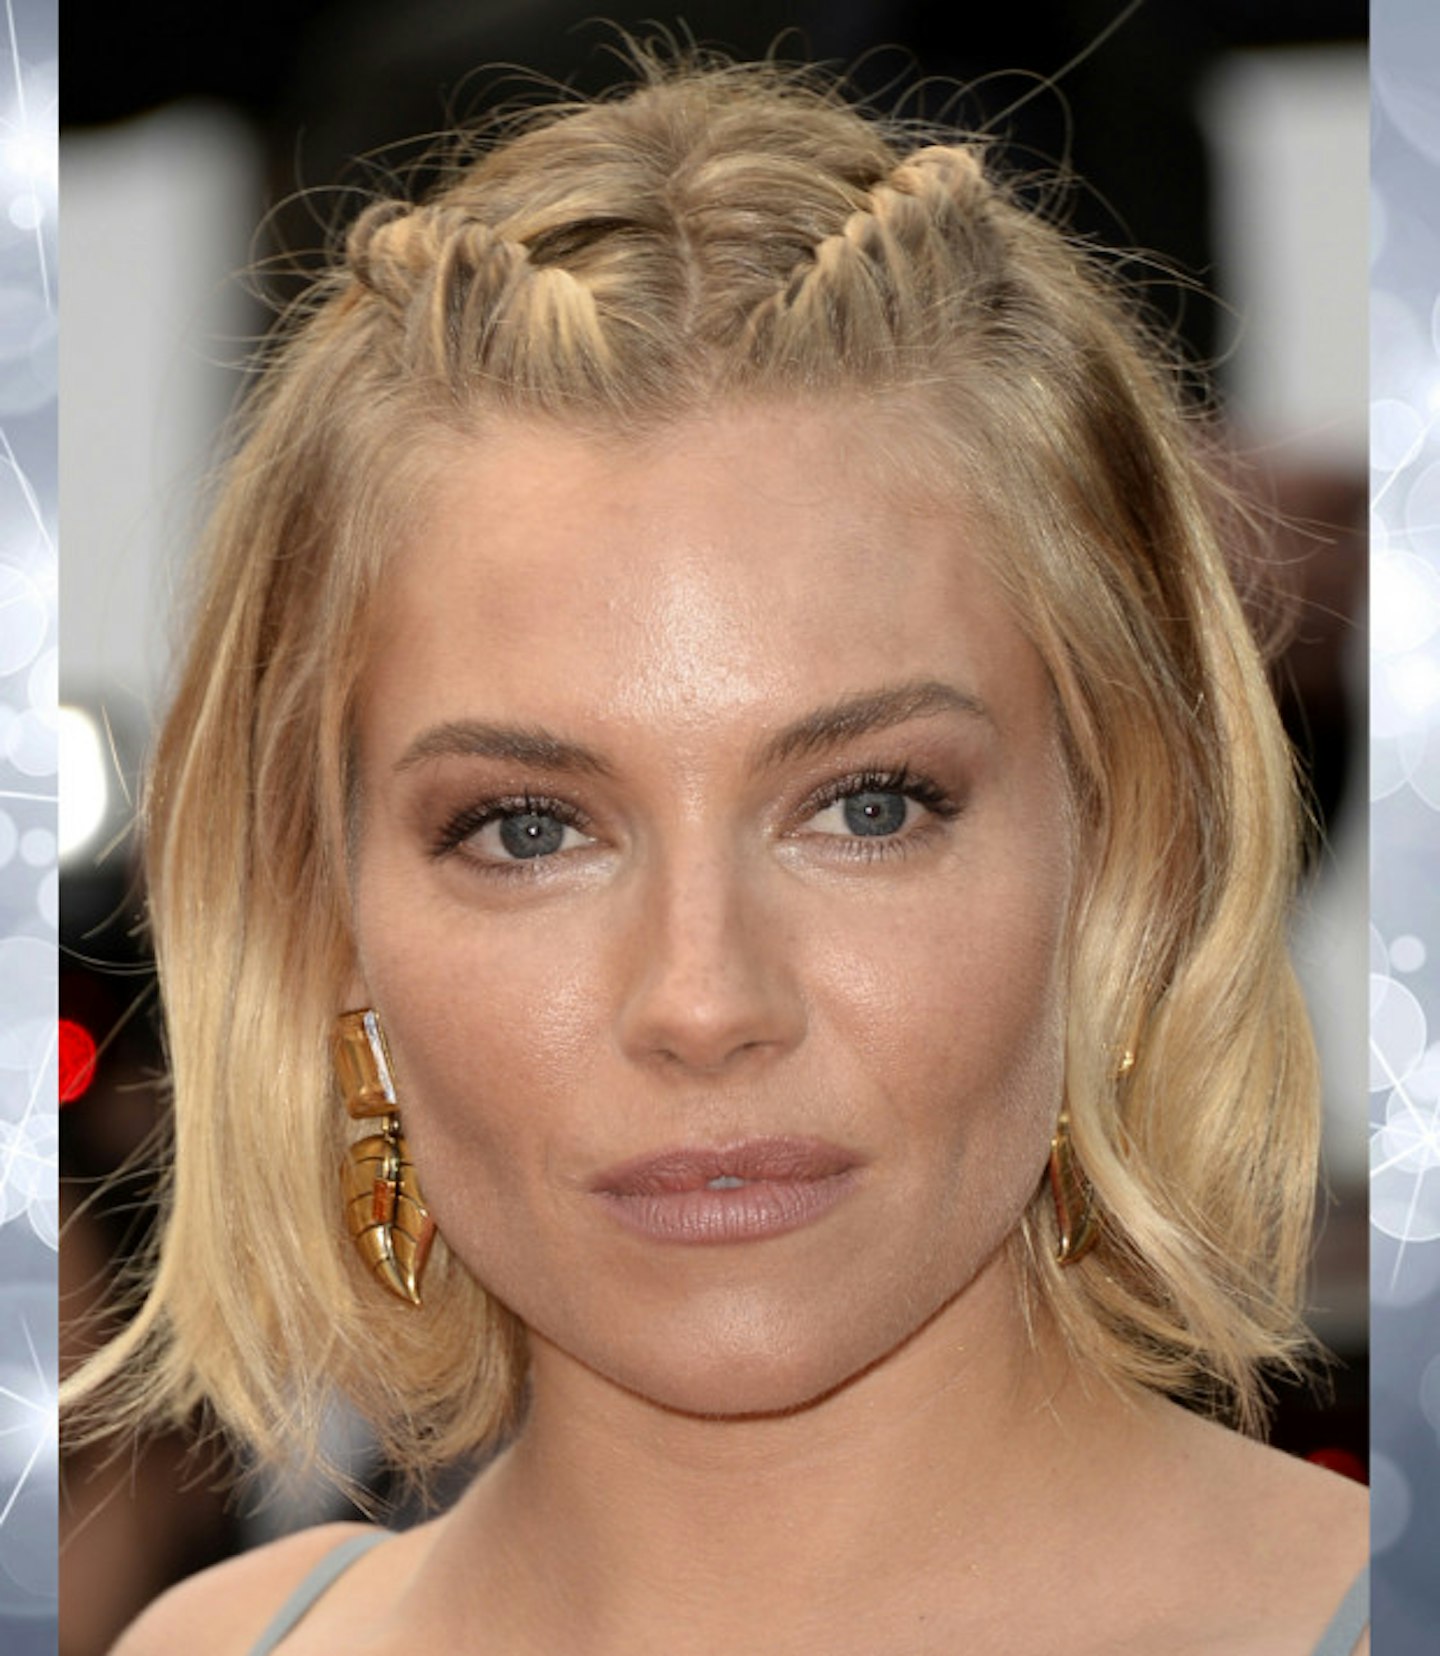 sienna-miller-cannes-beauty-plaits-nude-lips